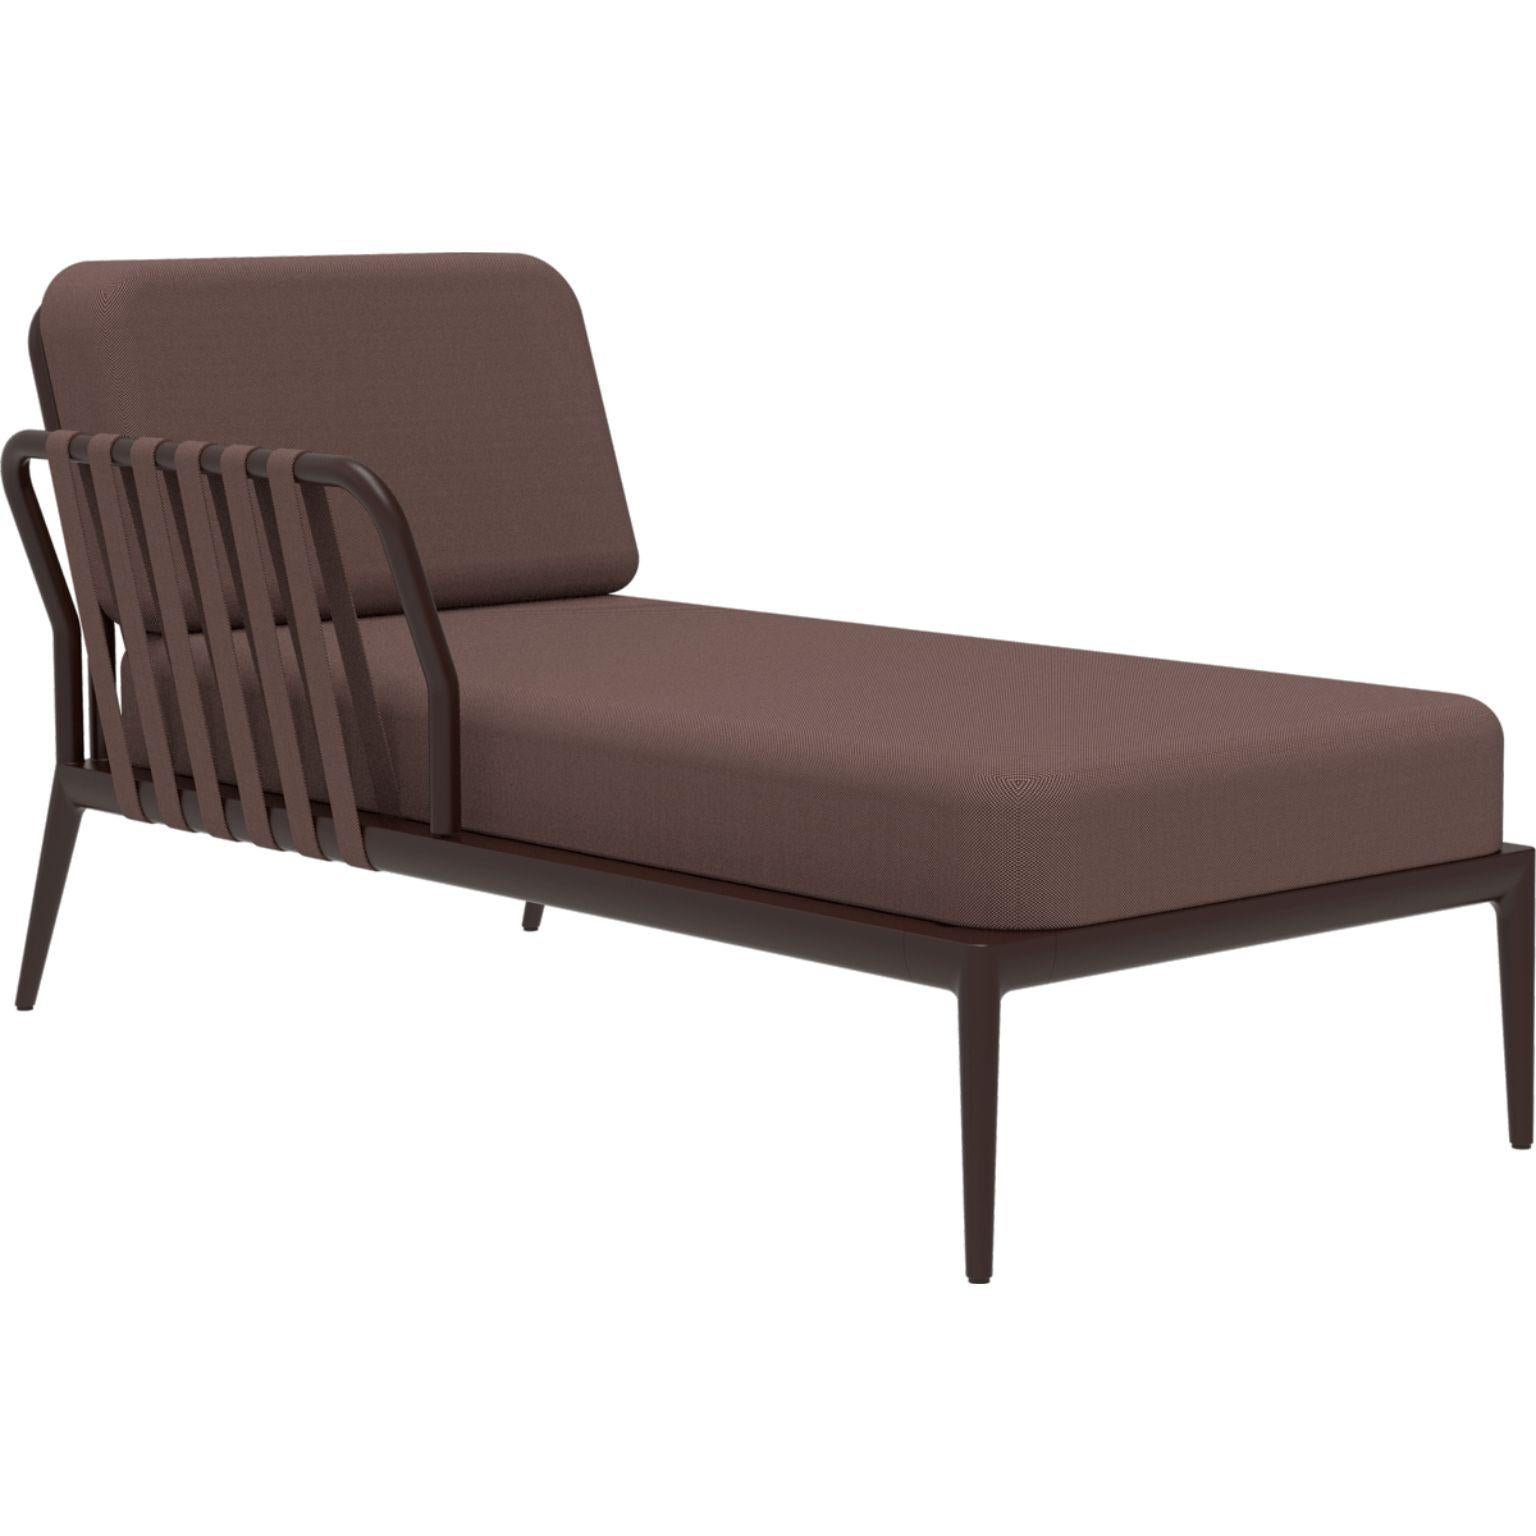 Ribbons chocolate right chaise longue by MOWEE
Dimensions: D80 x W155 x H81 cm
Material: Aluminum, Upholstery
Weight: 28 kg
Also available in different colours and finishes. 

An unmistakable collection for its beauty and robustness. A tribute